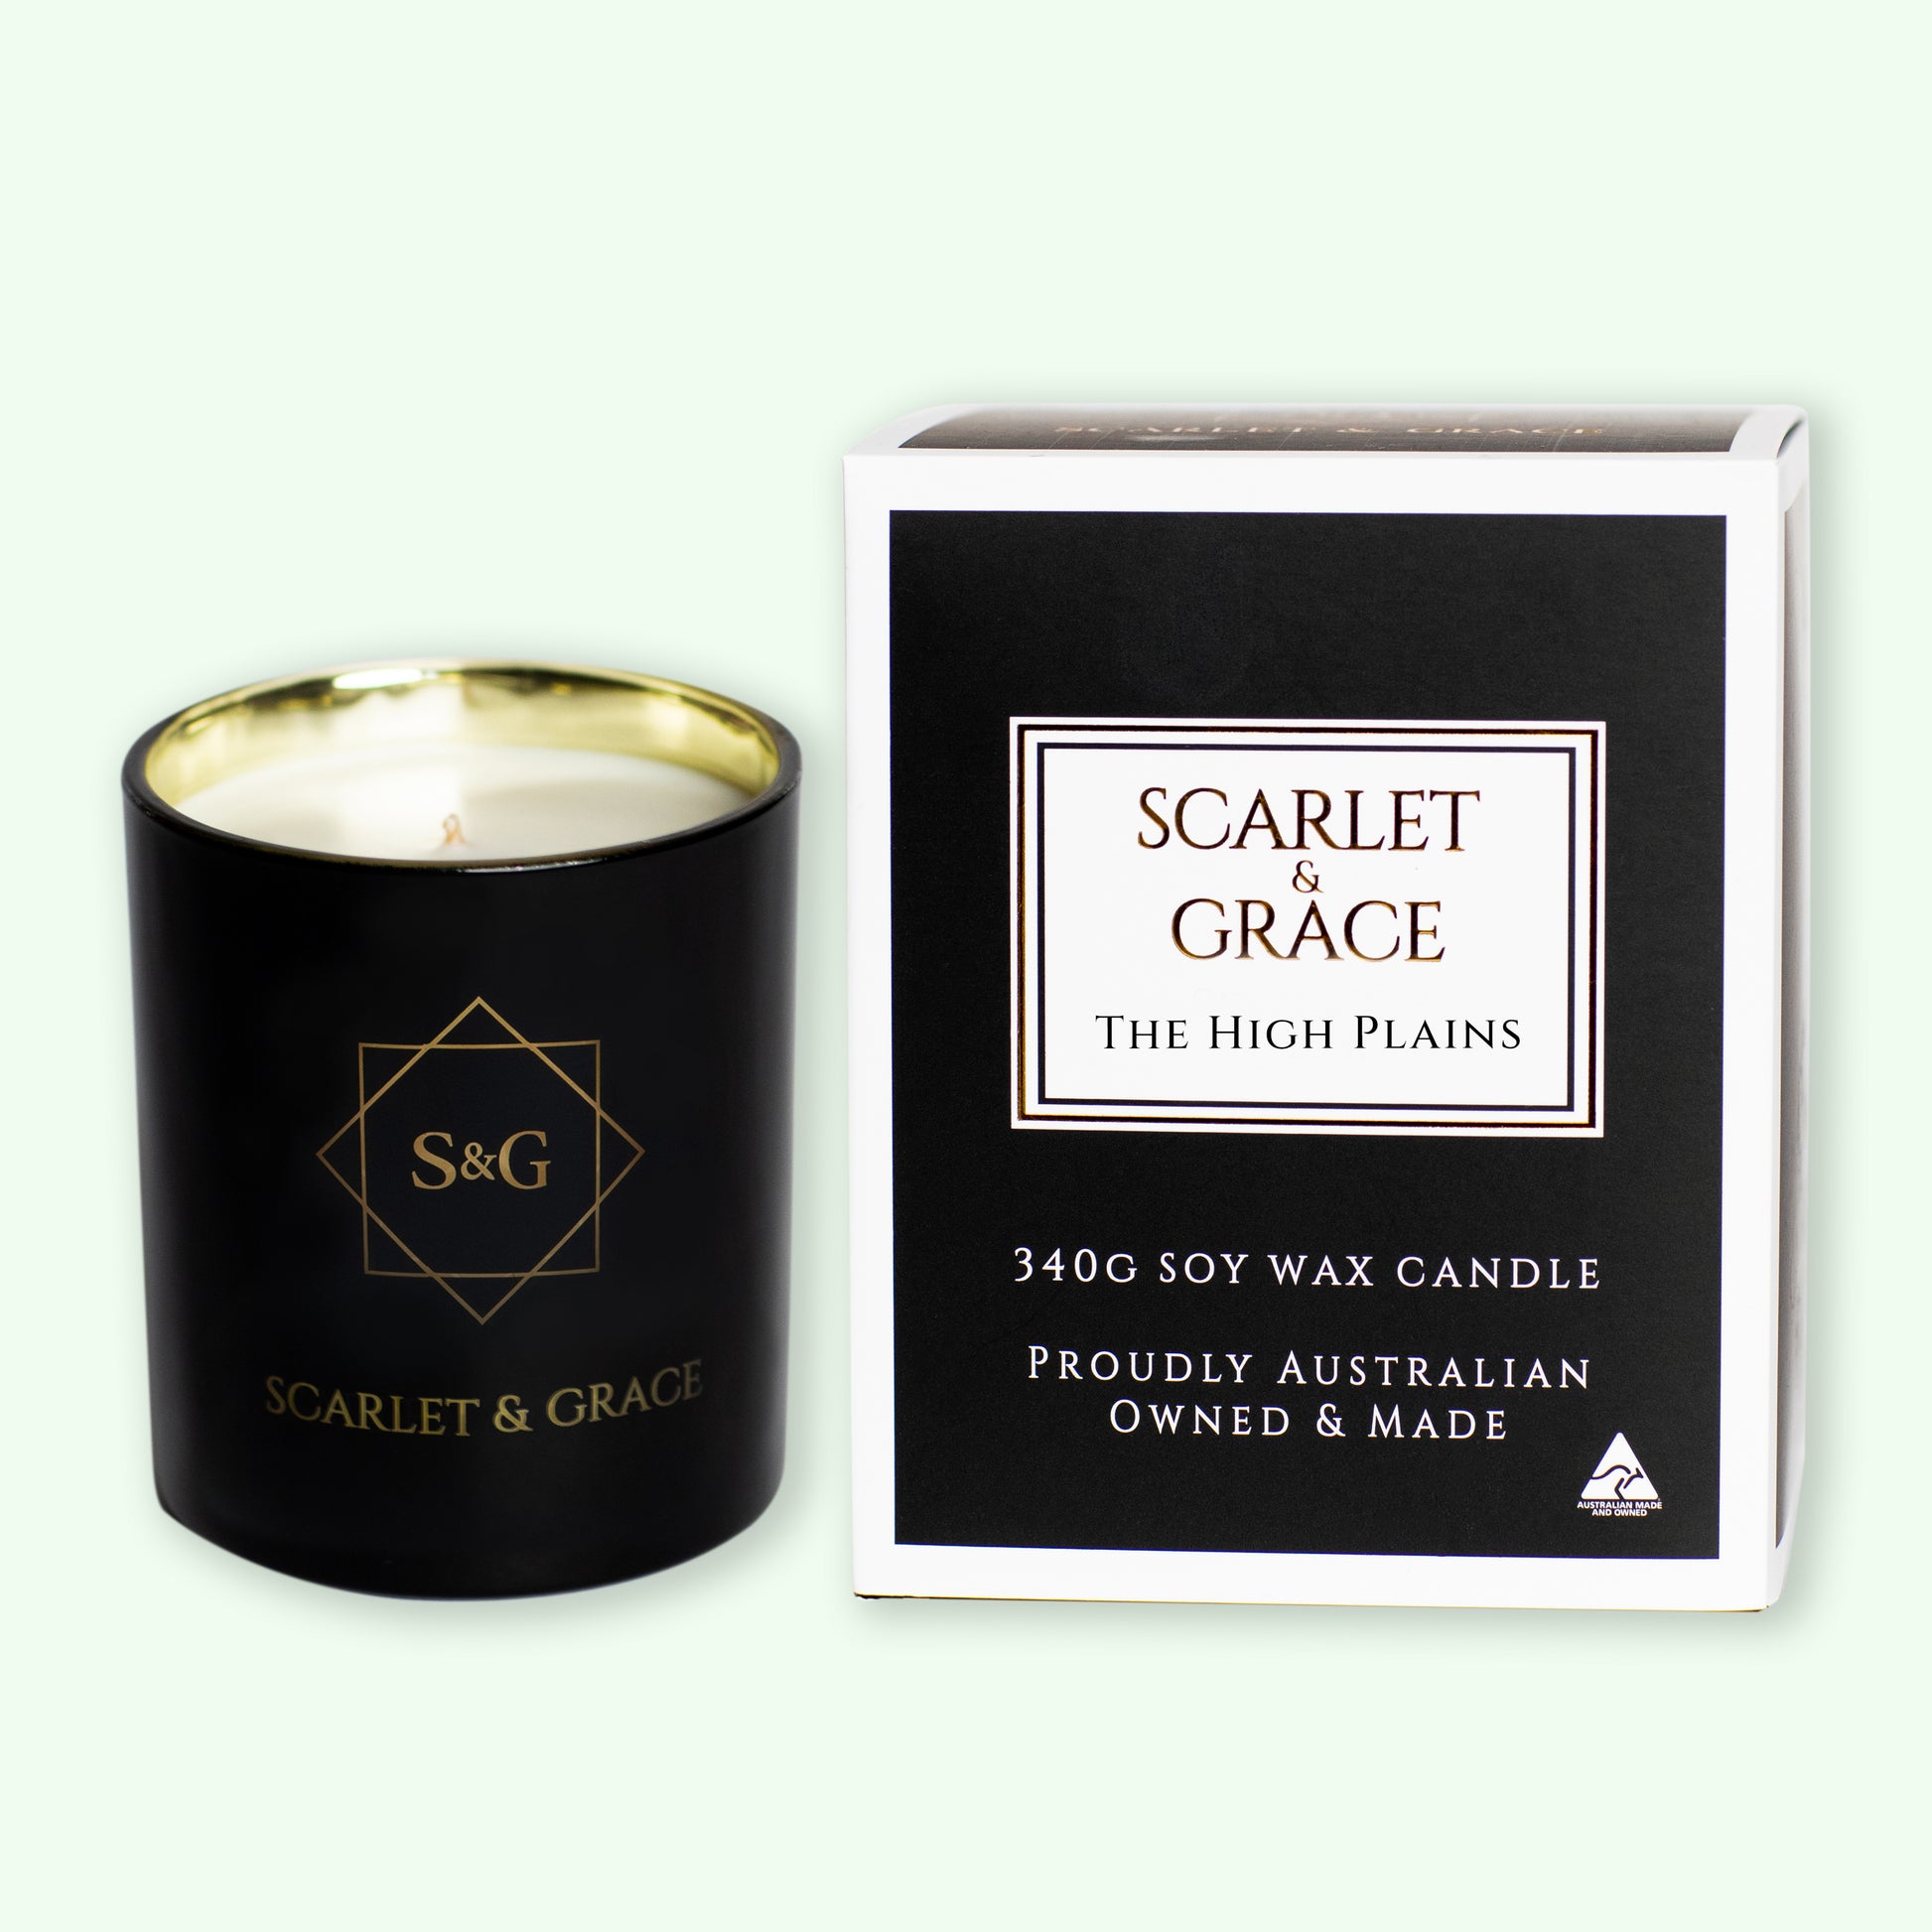 The High Plains - 340gm Soy Wax Candle - Scarlet & Grace